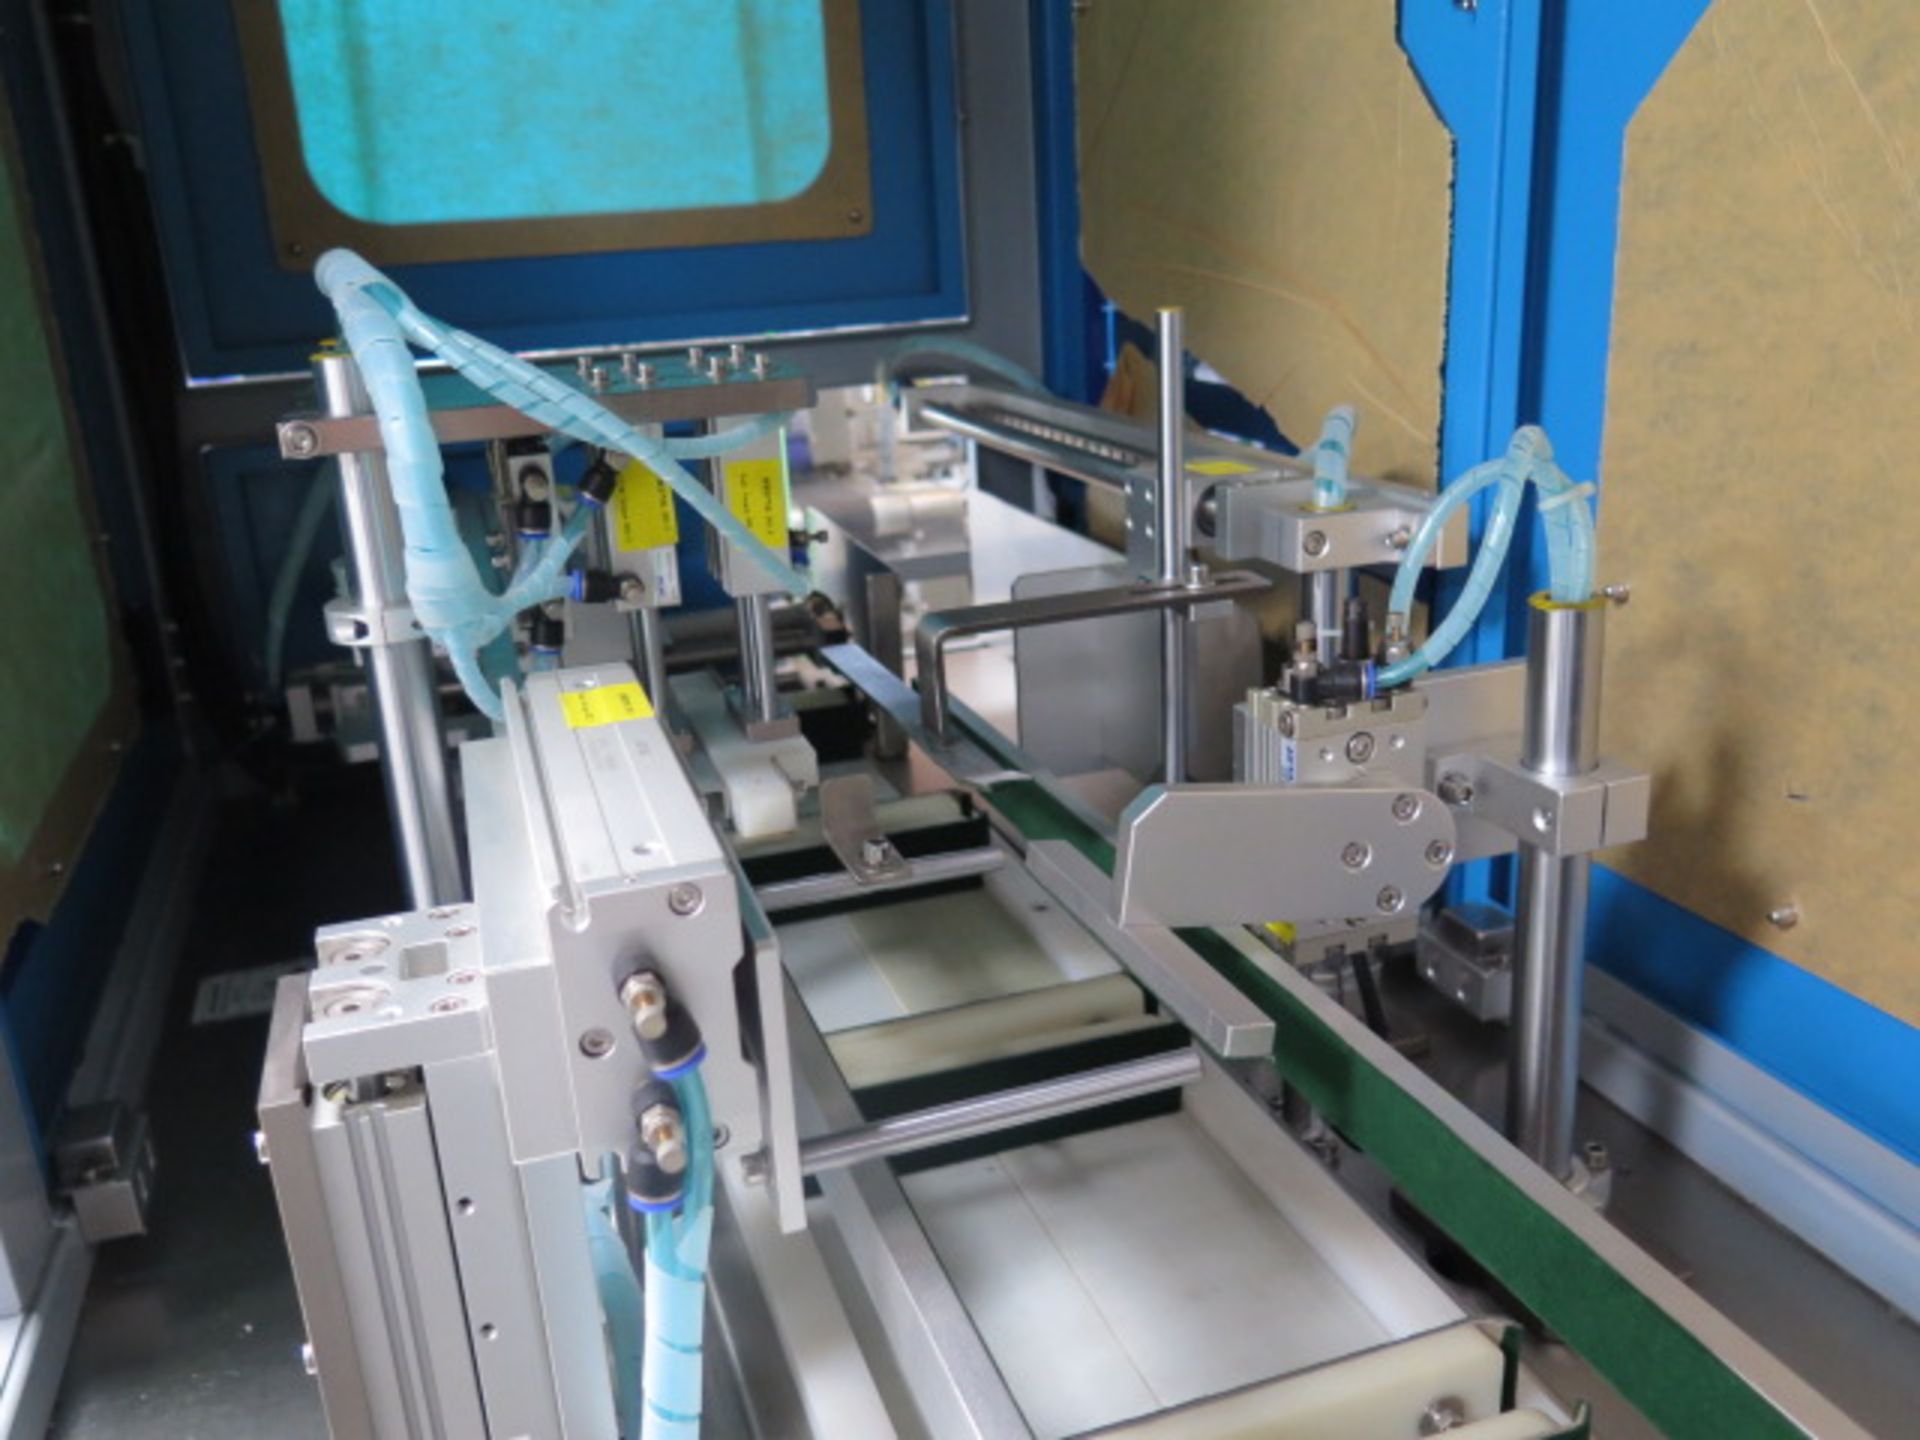 2021 (NEW) Rongyu Robotic Packaging Machine w/ HSR-BR616 6-Axis Robotic Manipulator, SOLD AS IS - Image 31 of 46